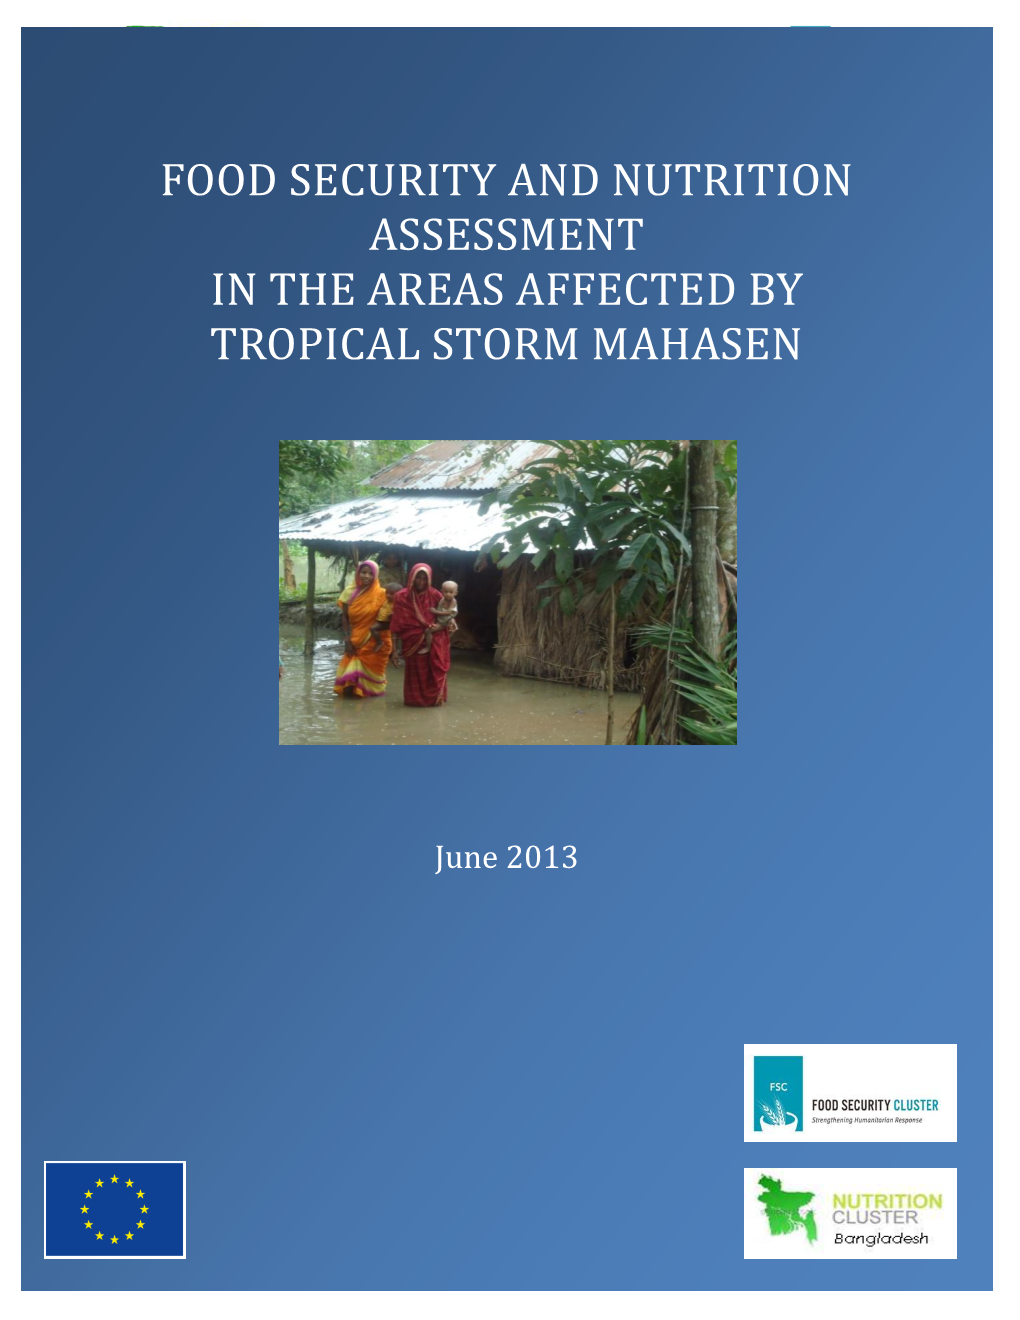 Food Security Assessment in the Areas Affected By